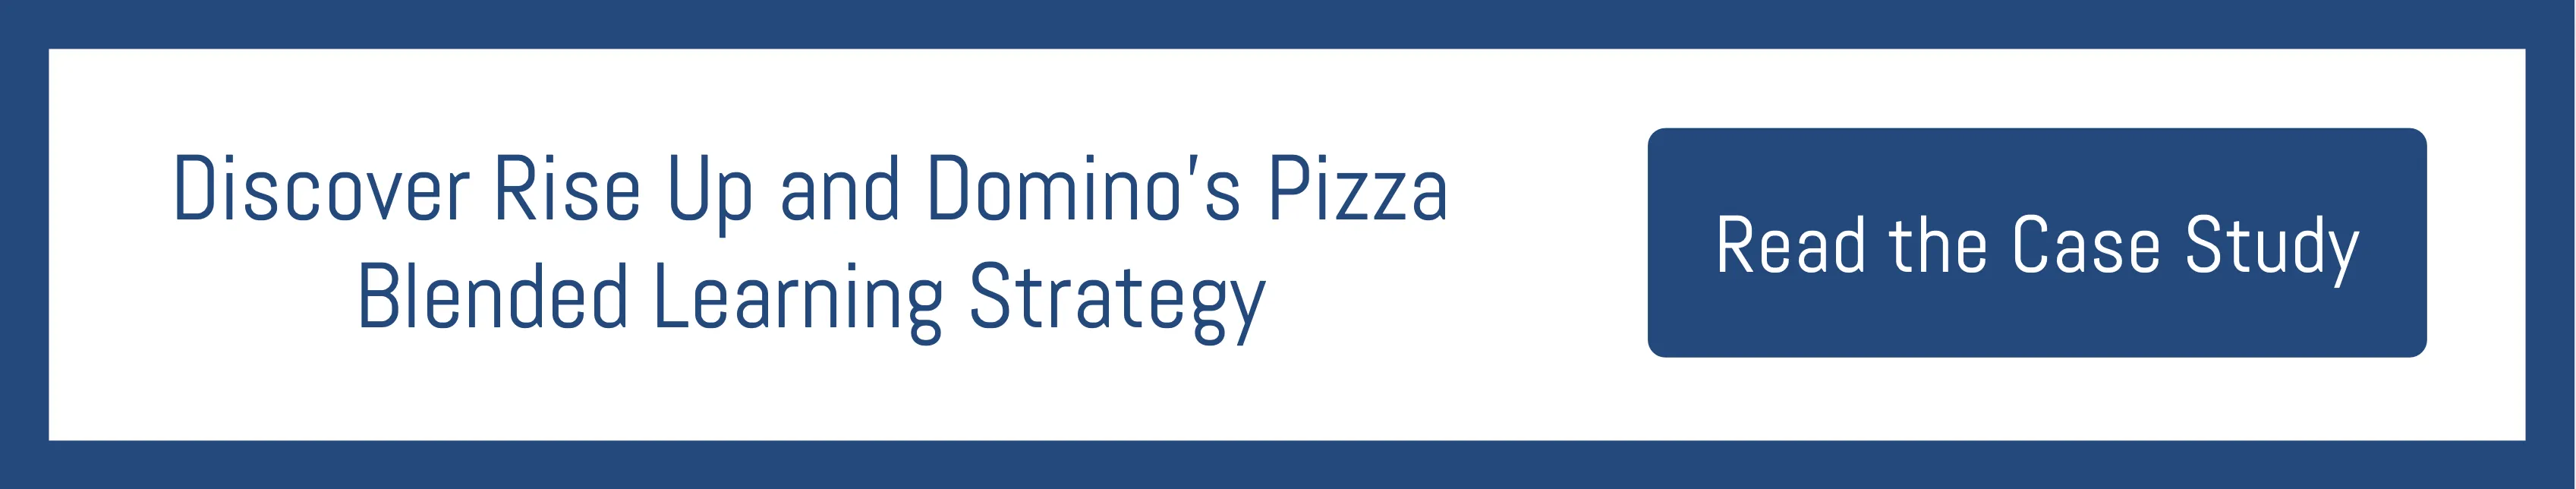 Discover Rise Up x Domino's Pizza case study